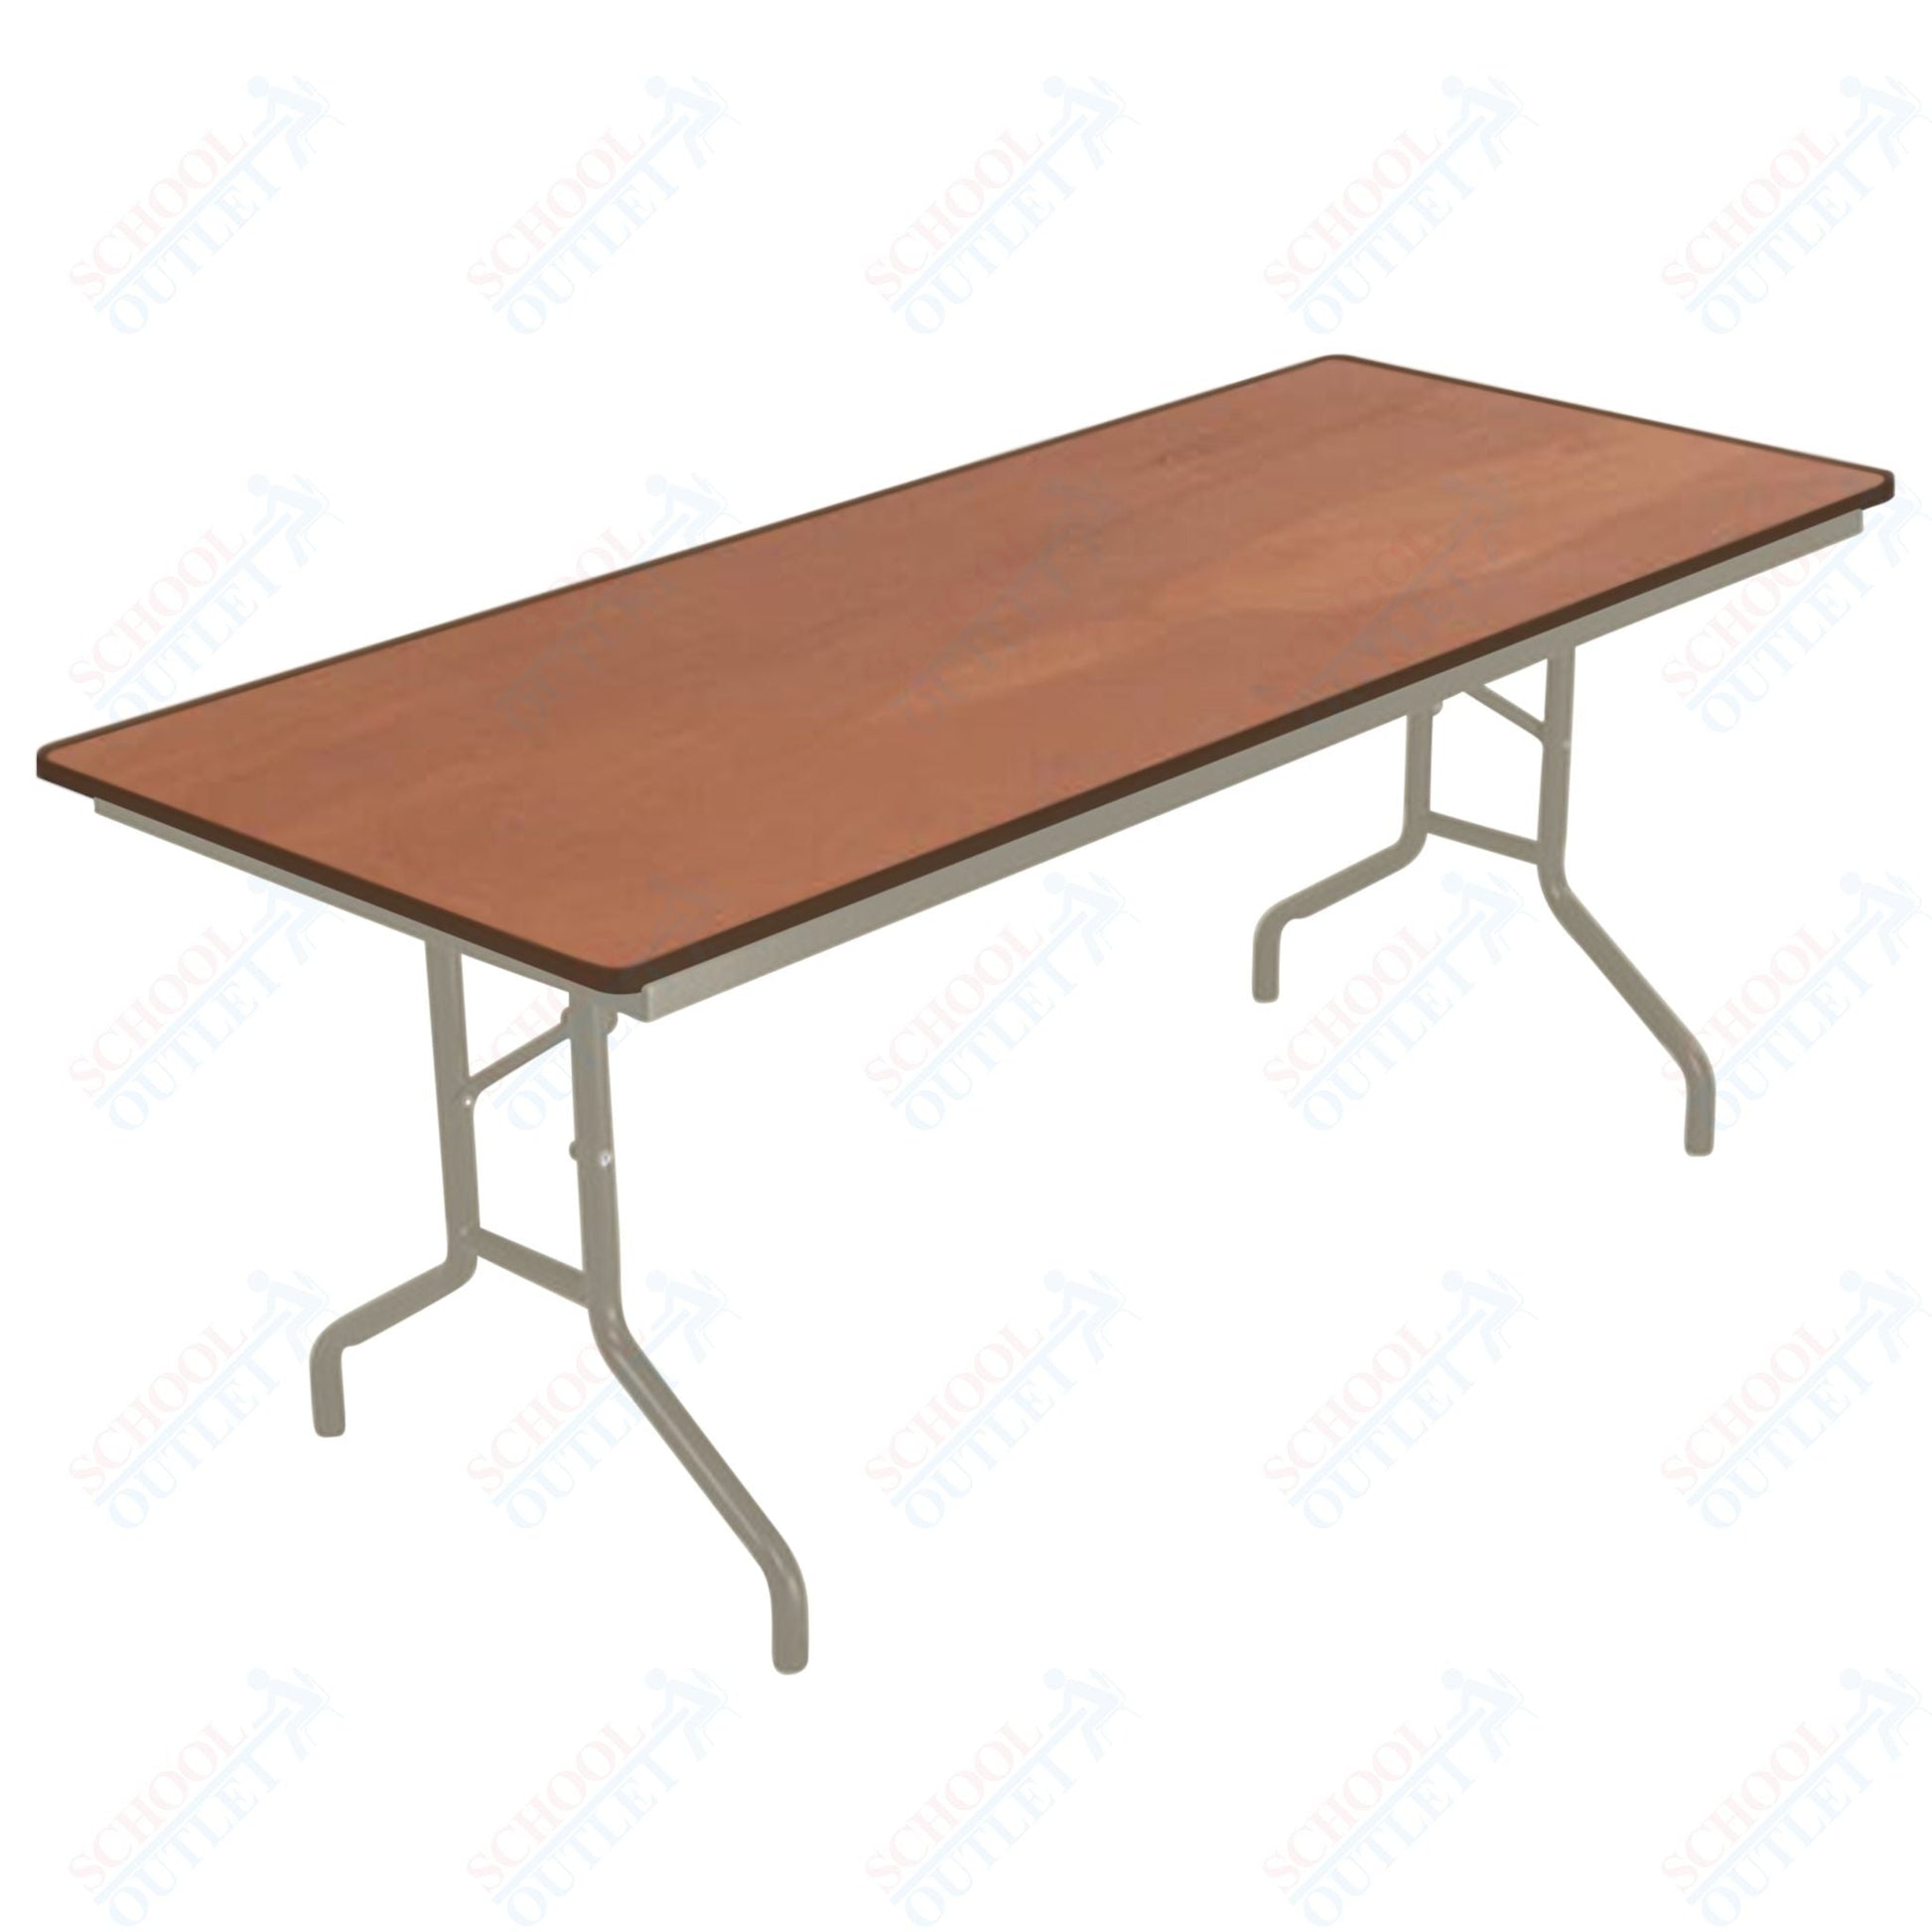 AmTab Folding Table - Plywood Stained and Sealed - Vinyl T - Molding Edge - 30"W x 60"L x 29"H (AmTab AMT - 305PM) - SchoolOutlet